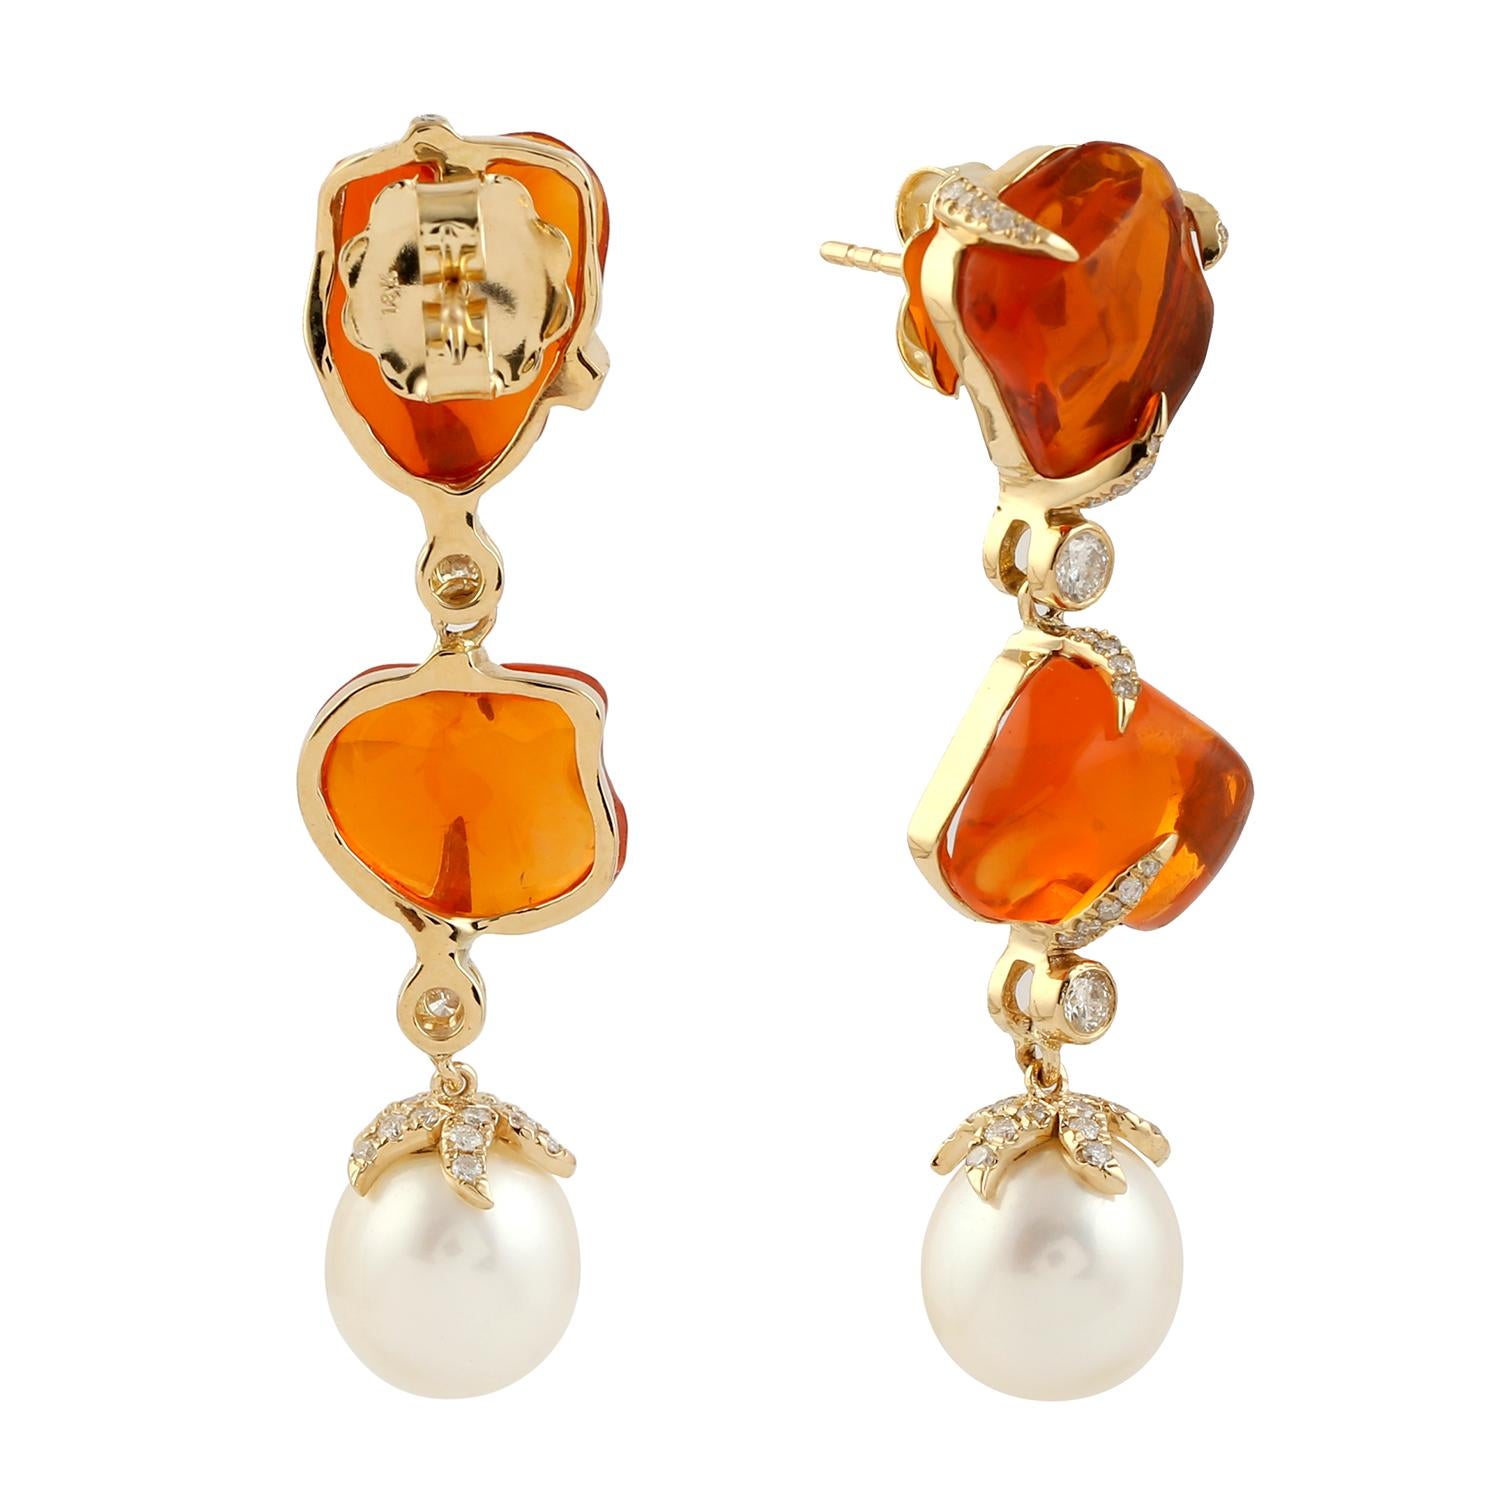 Cast in 18 karat gold. These earrings are hand set in 14.53 carats fire opal, 15.31 carats pearl, .77 carats of sparkling diamonds.

FOLLOW  MEGHNA JEWELS storefront to view the latest collection & exclusive pieces.  Meghna Jewels is proudly rated